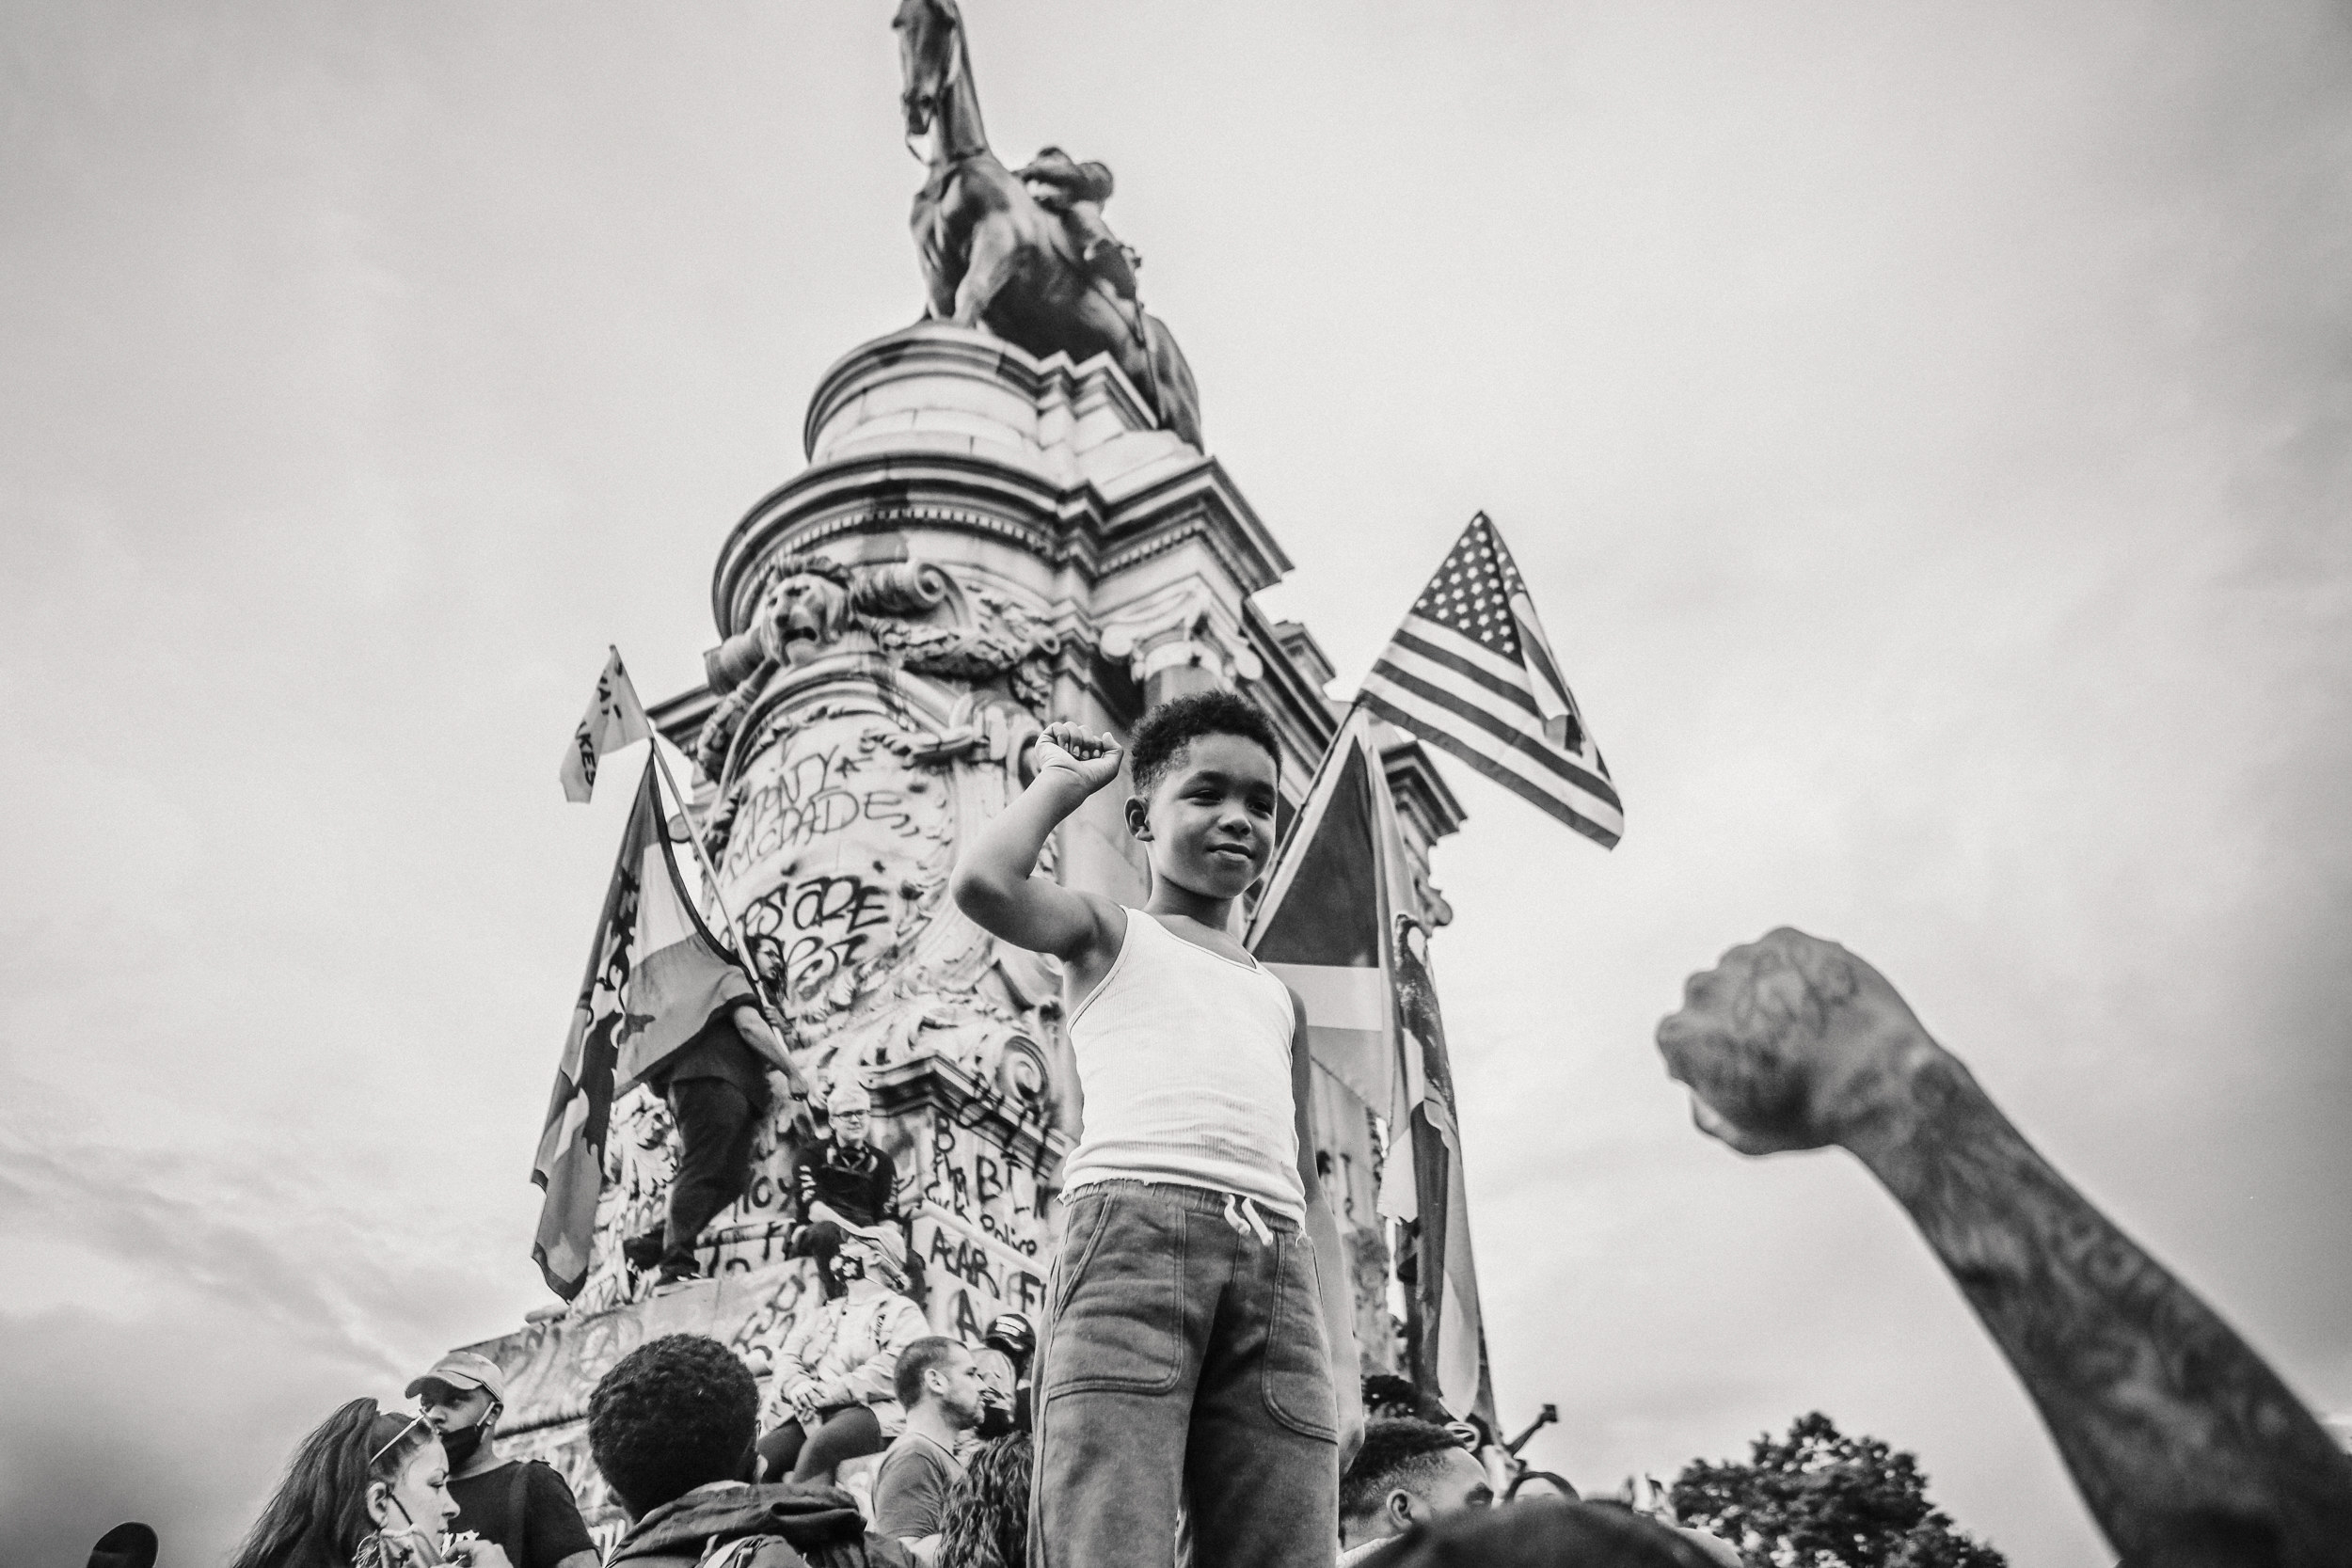 A young boy standing on a statue with his fist up and other protesters in the background with the American flag